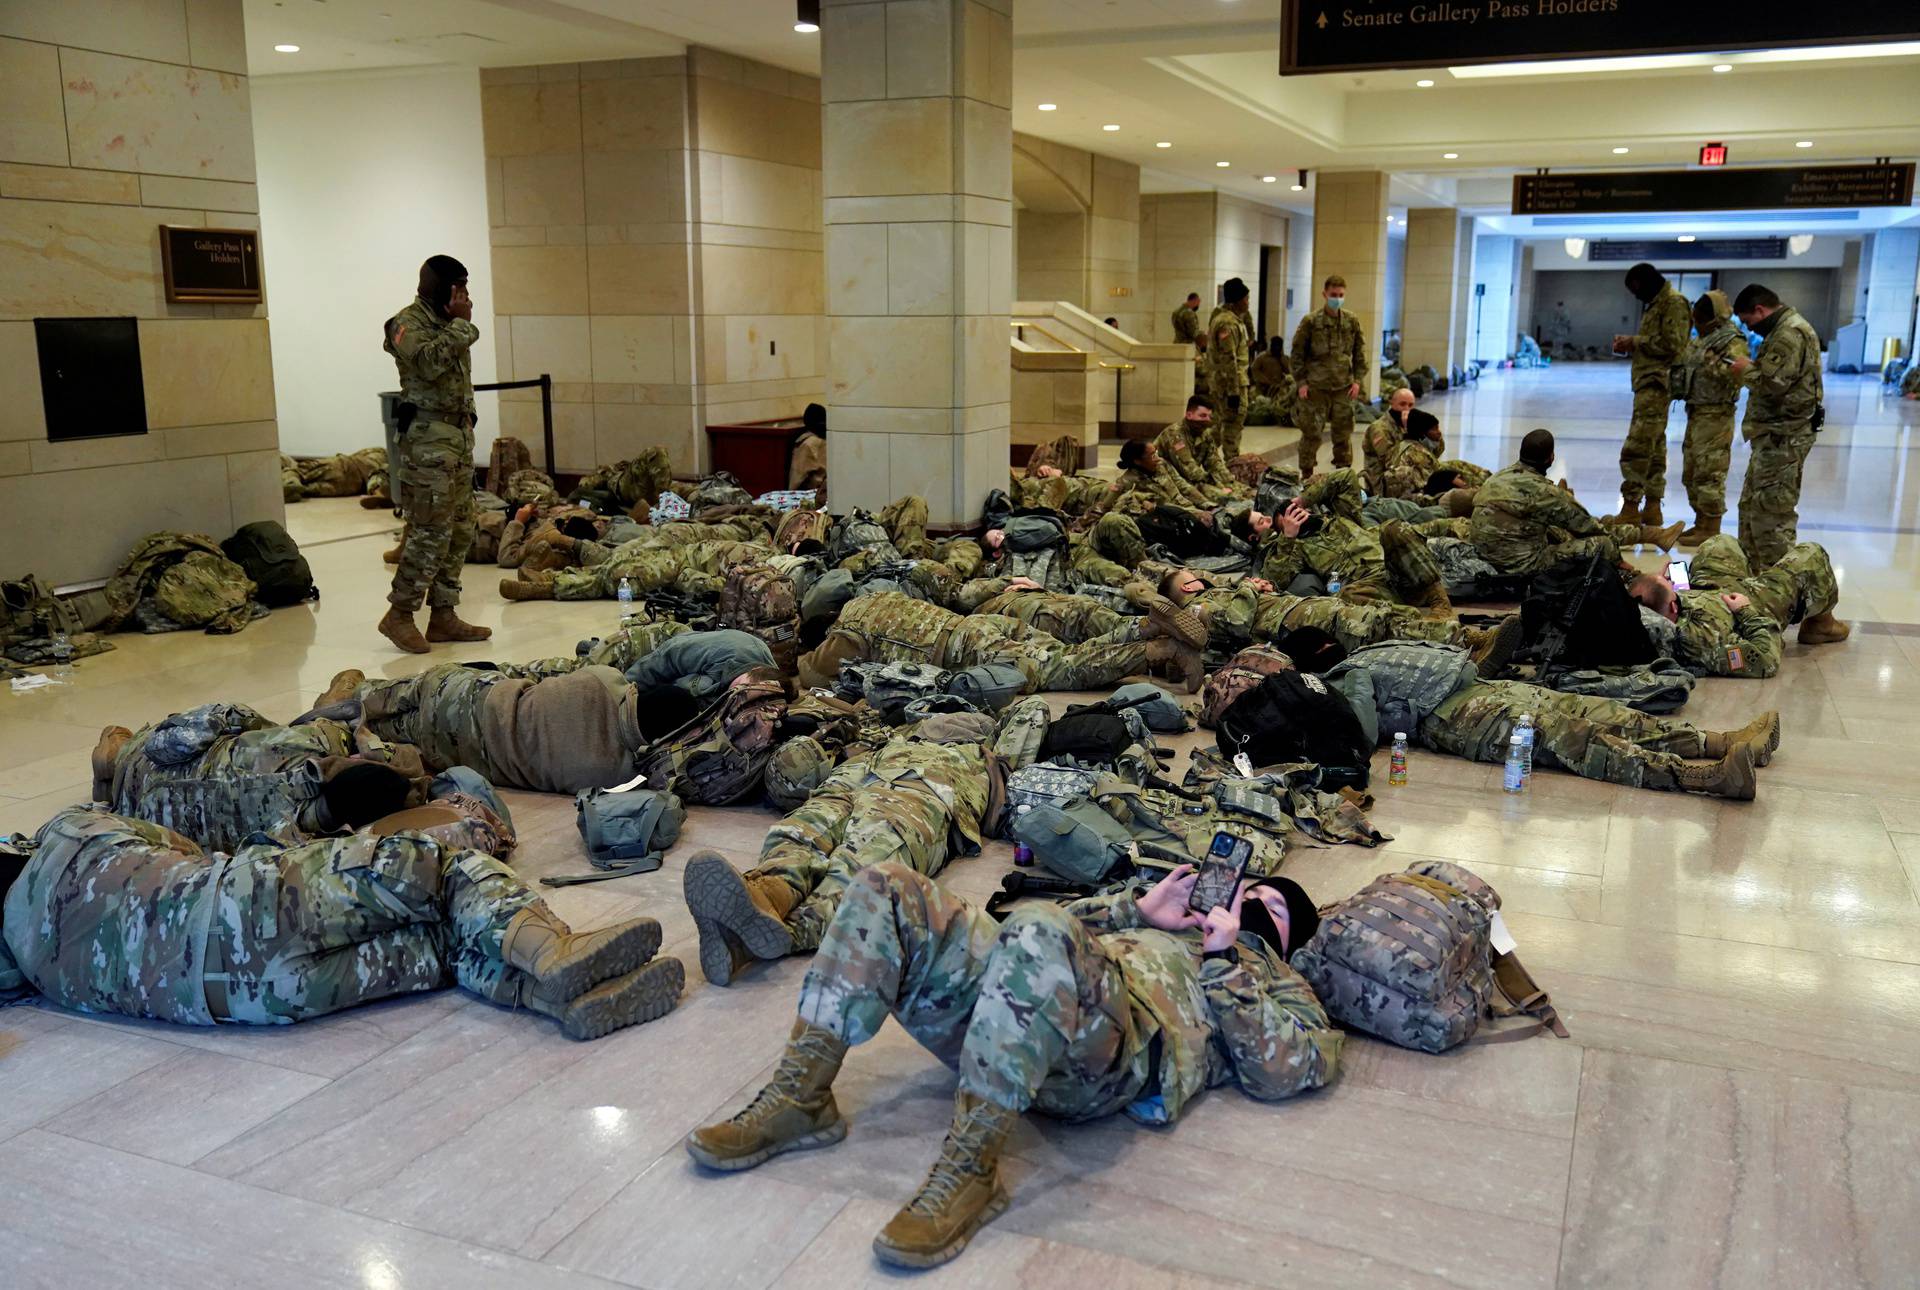 National Guard members sleep in the Capitol Vistor's Center in Washington